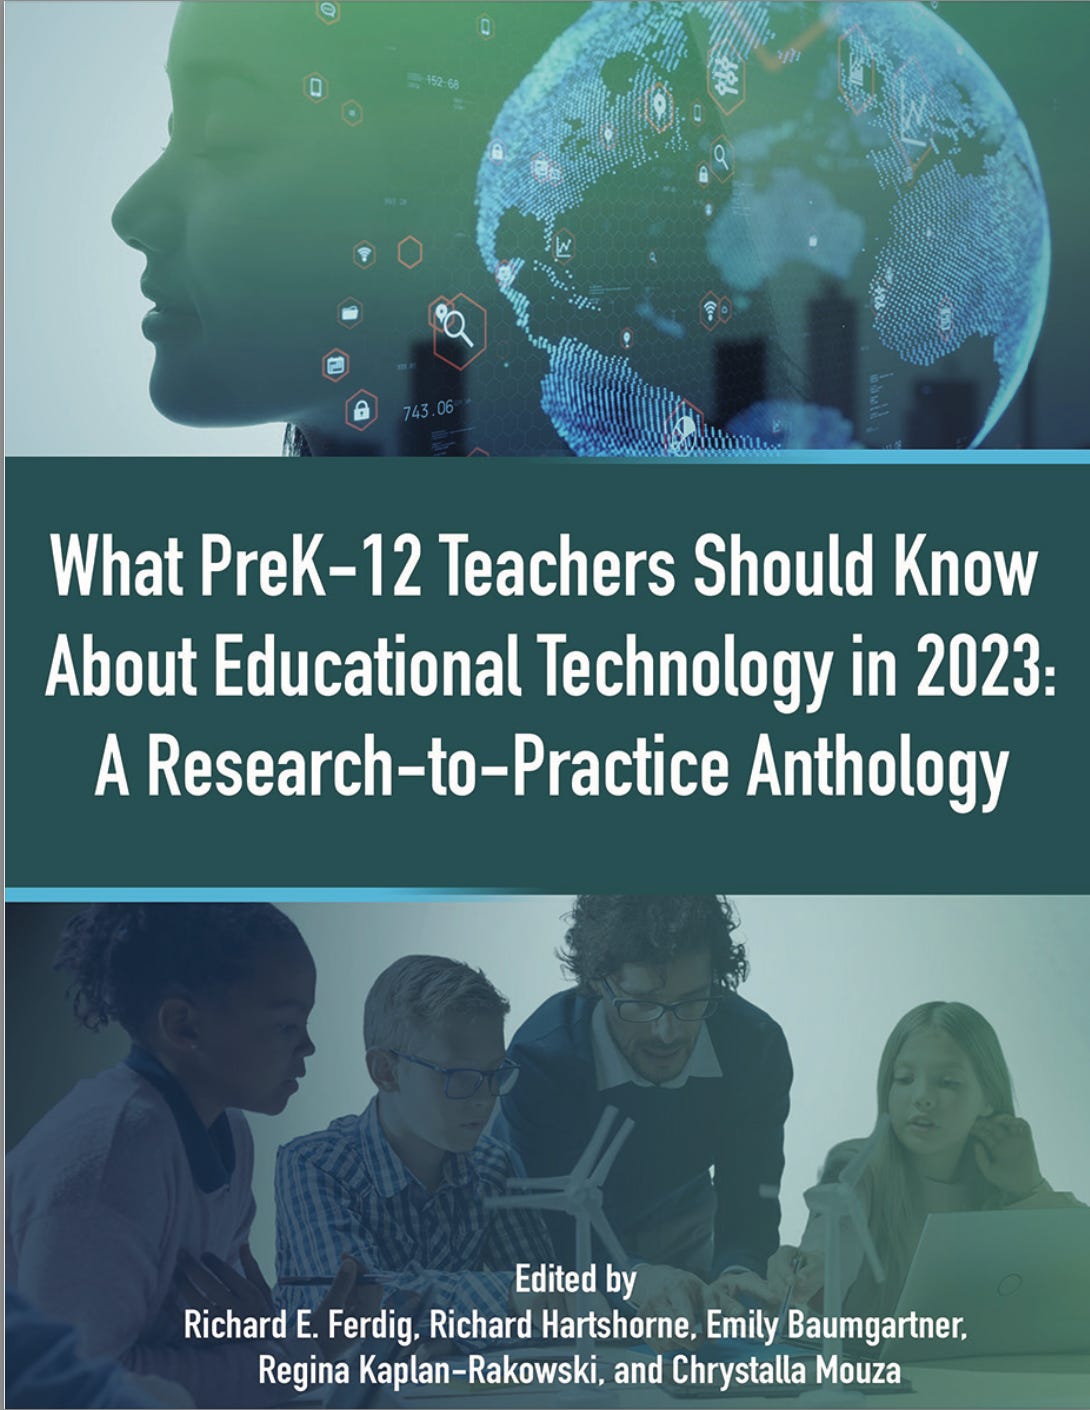 The cover of the book What PreK-12 Teachers Should Know about Educational Technology in 2023